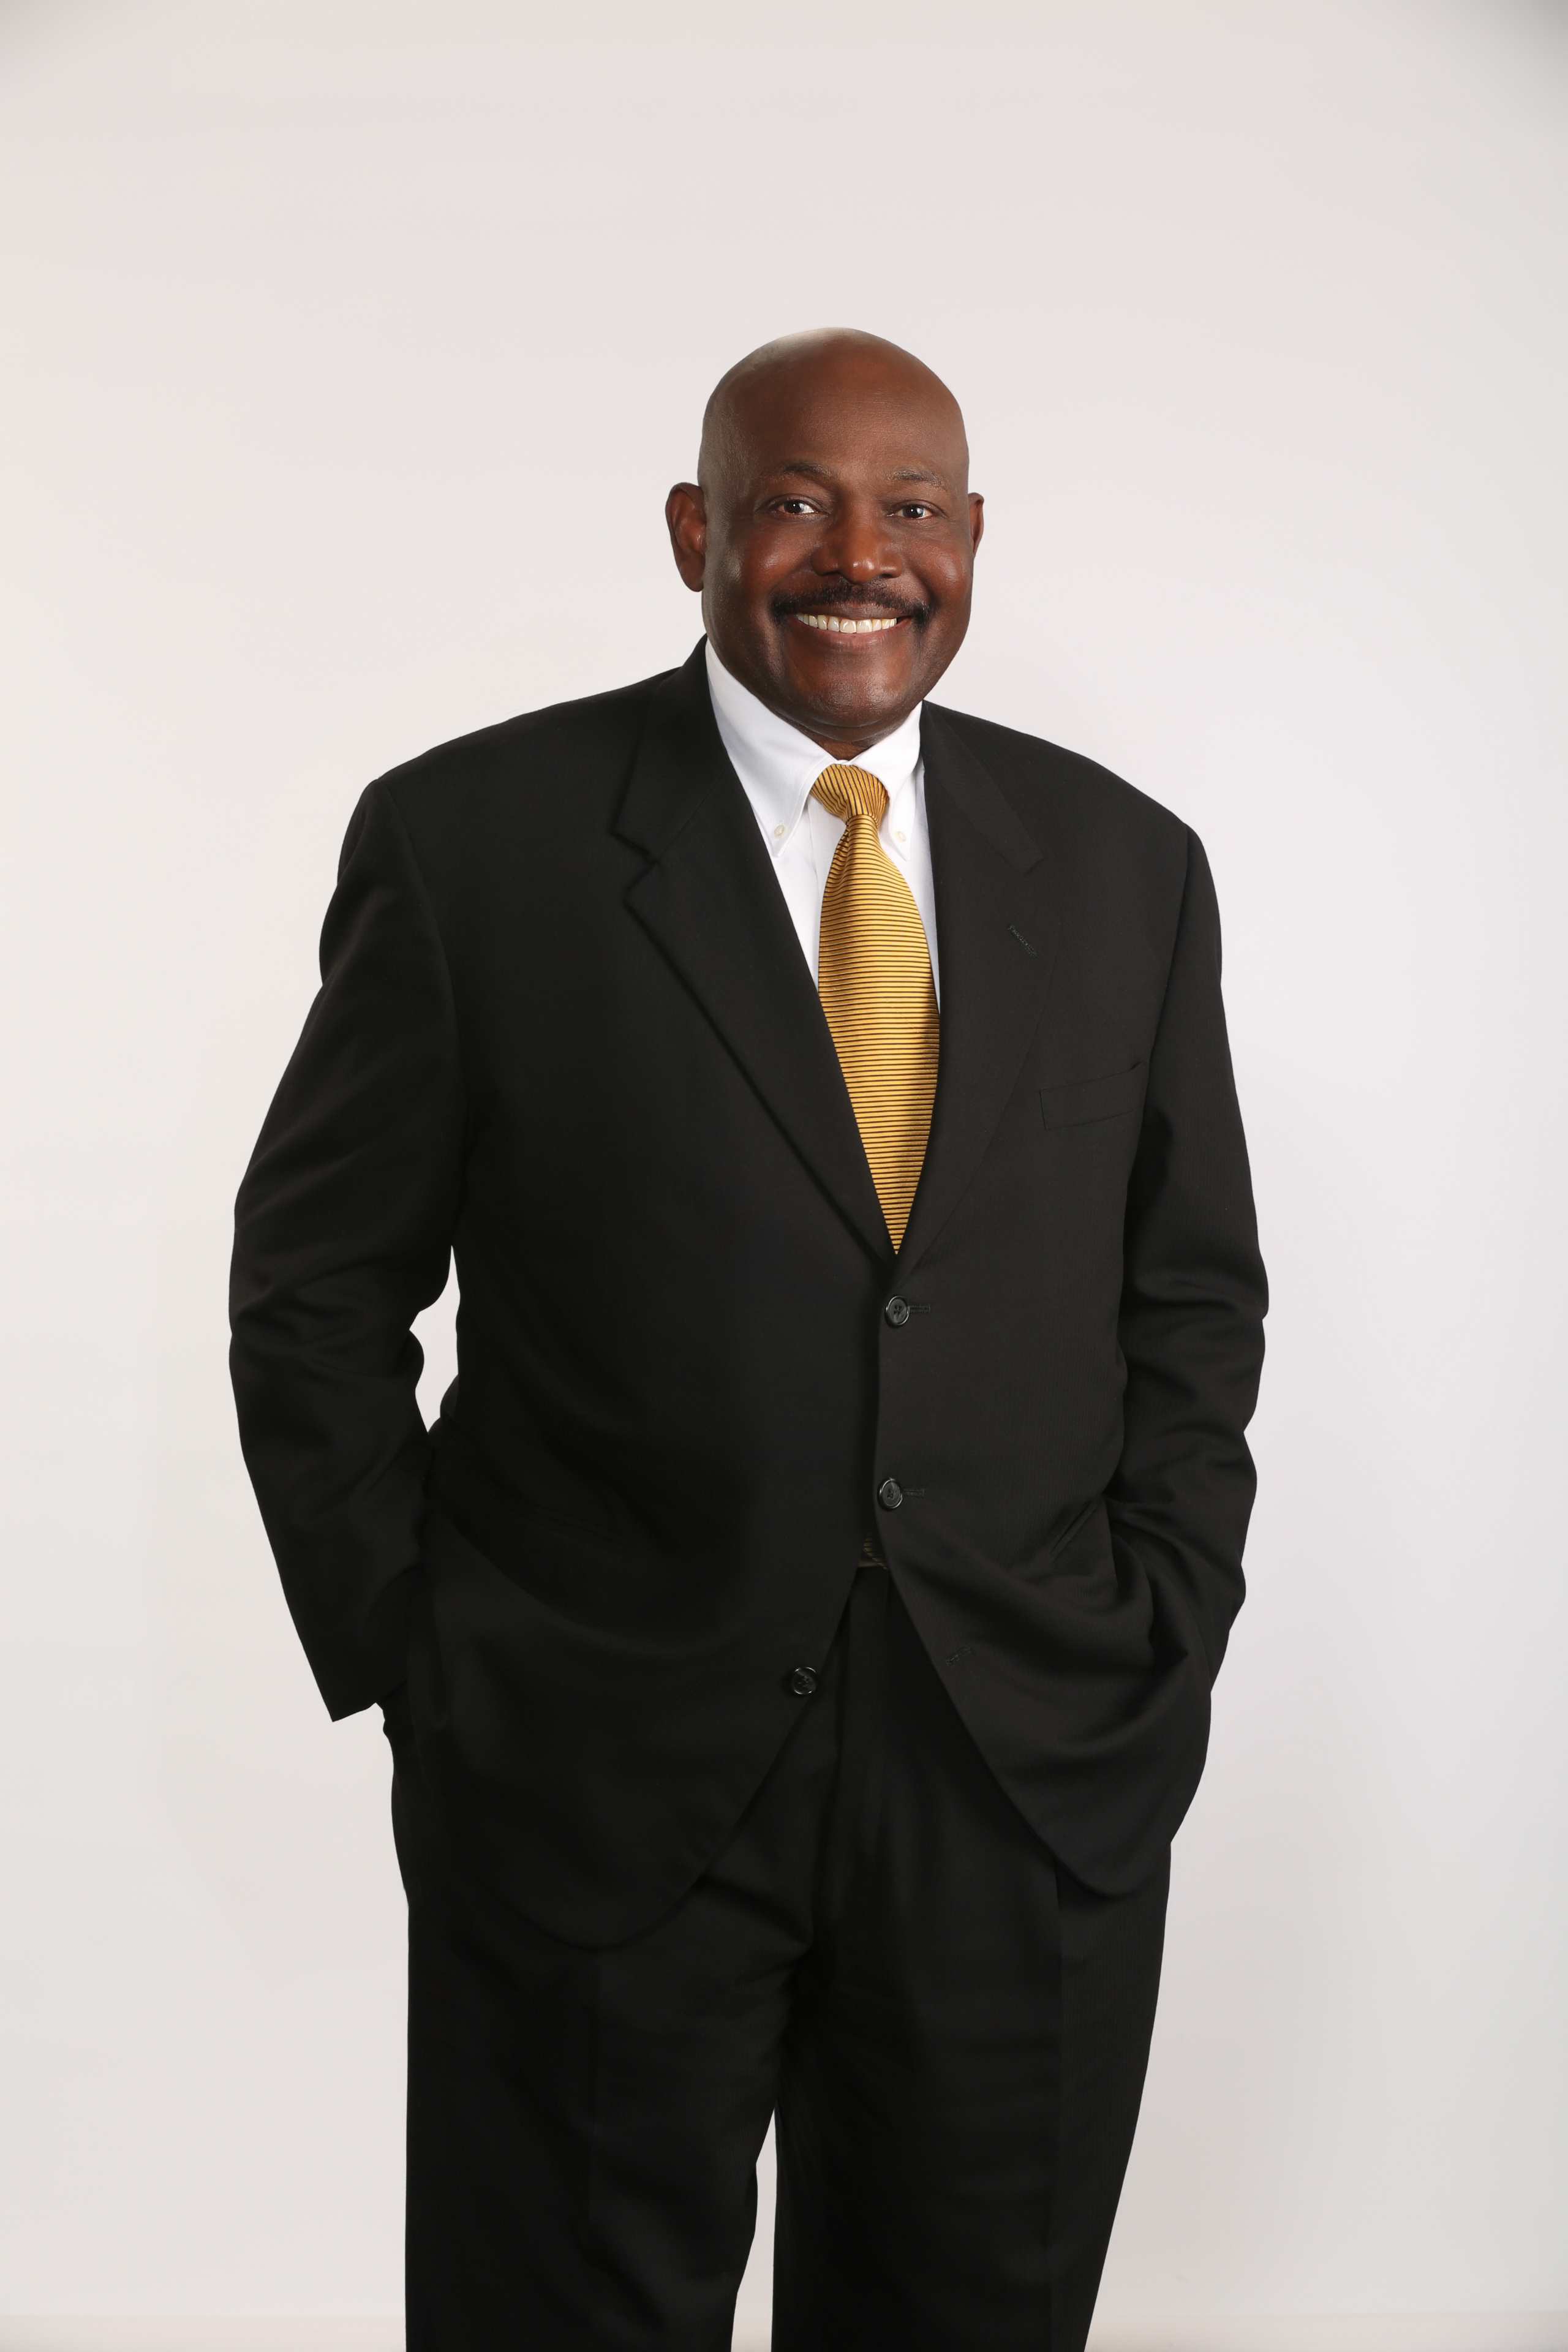 For over 3 decades, former Senator Charles W. Walker has dedicated his life and career to public service. Now, he's an in-demand Motivational Speaker, Political Analyst, and Media Guest.